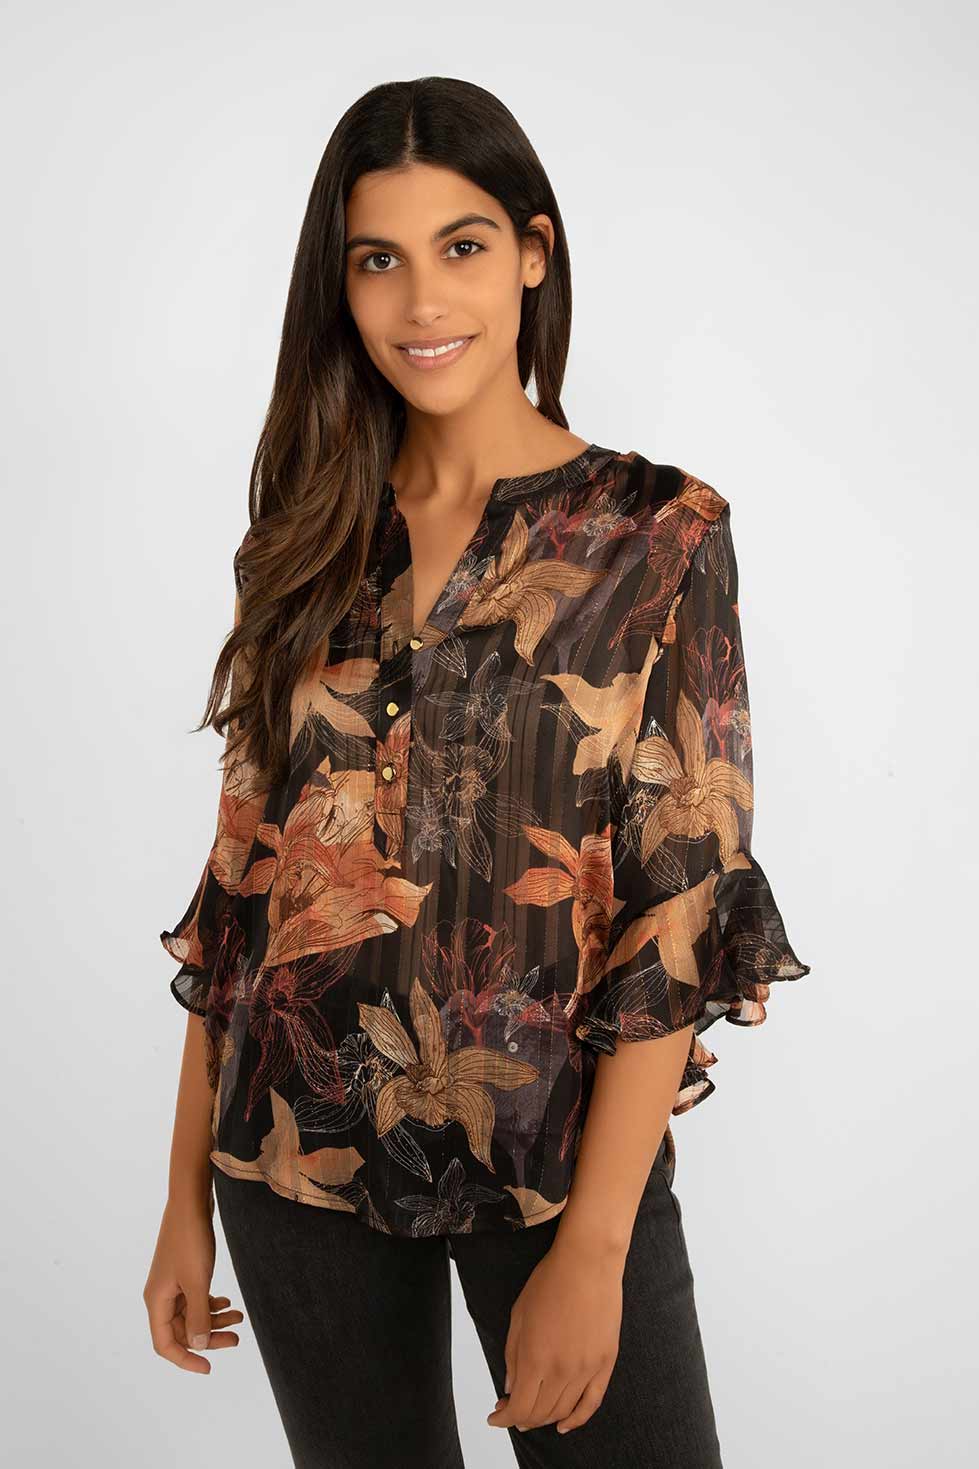 Women's Clothing FRANK LYMAN (234524) Ruffle Sleeves Floral Blouse  in BLACK/BROWN